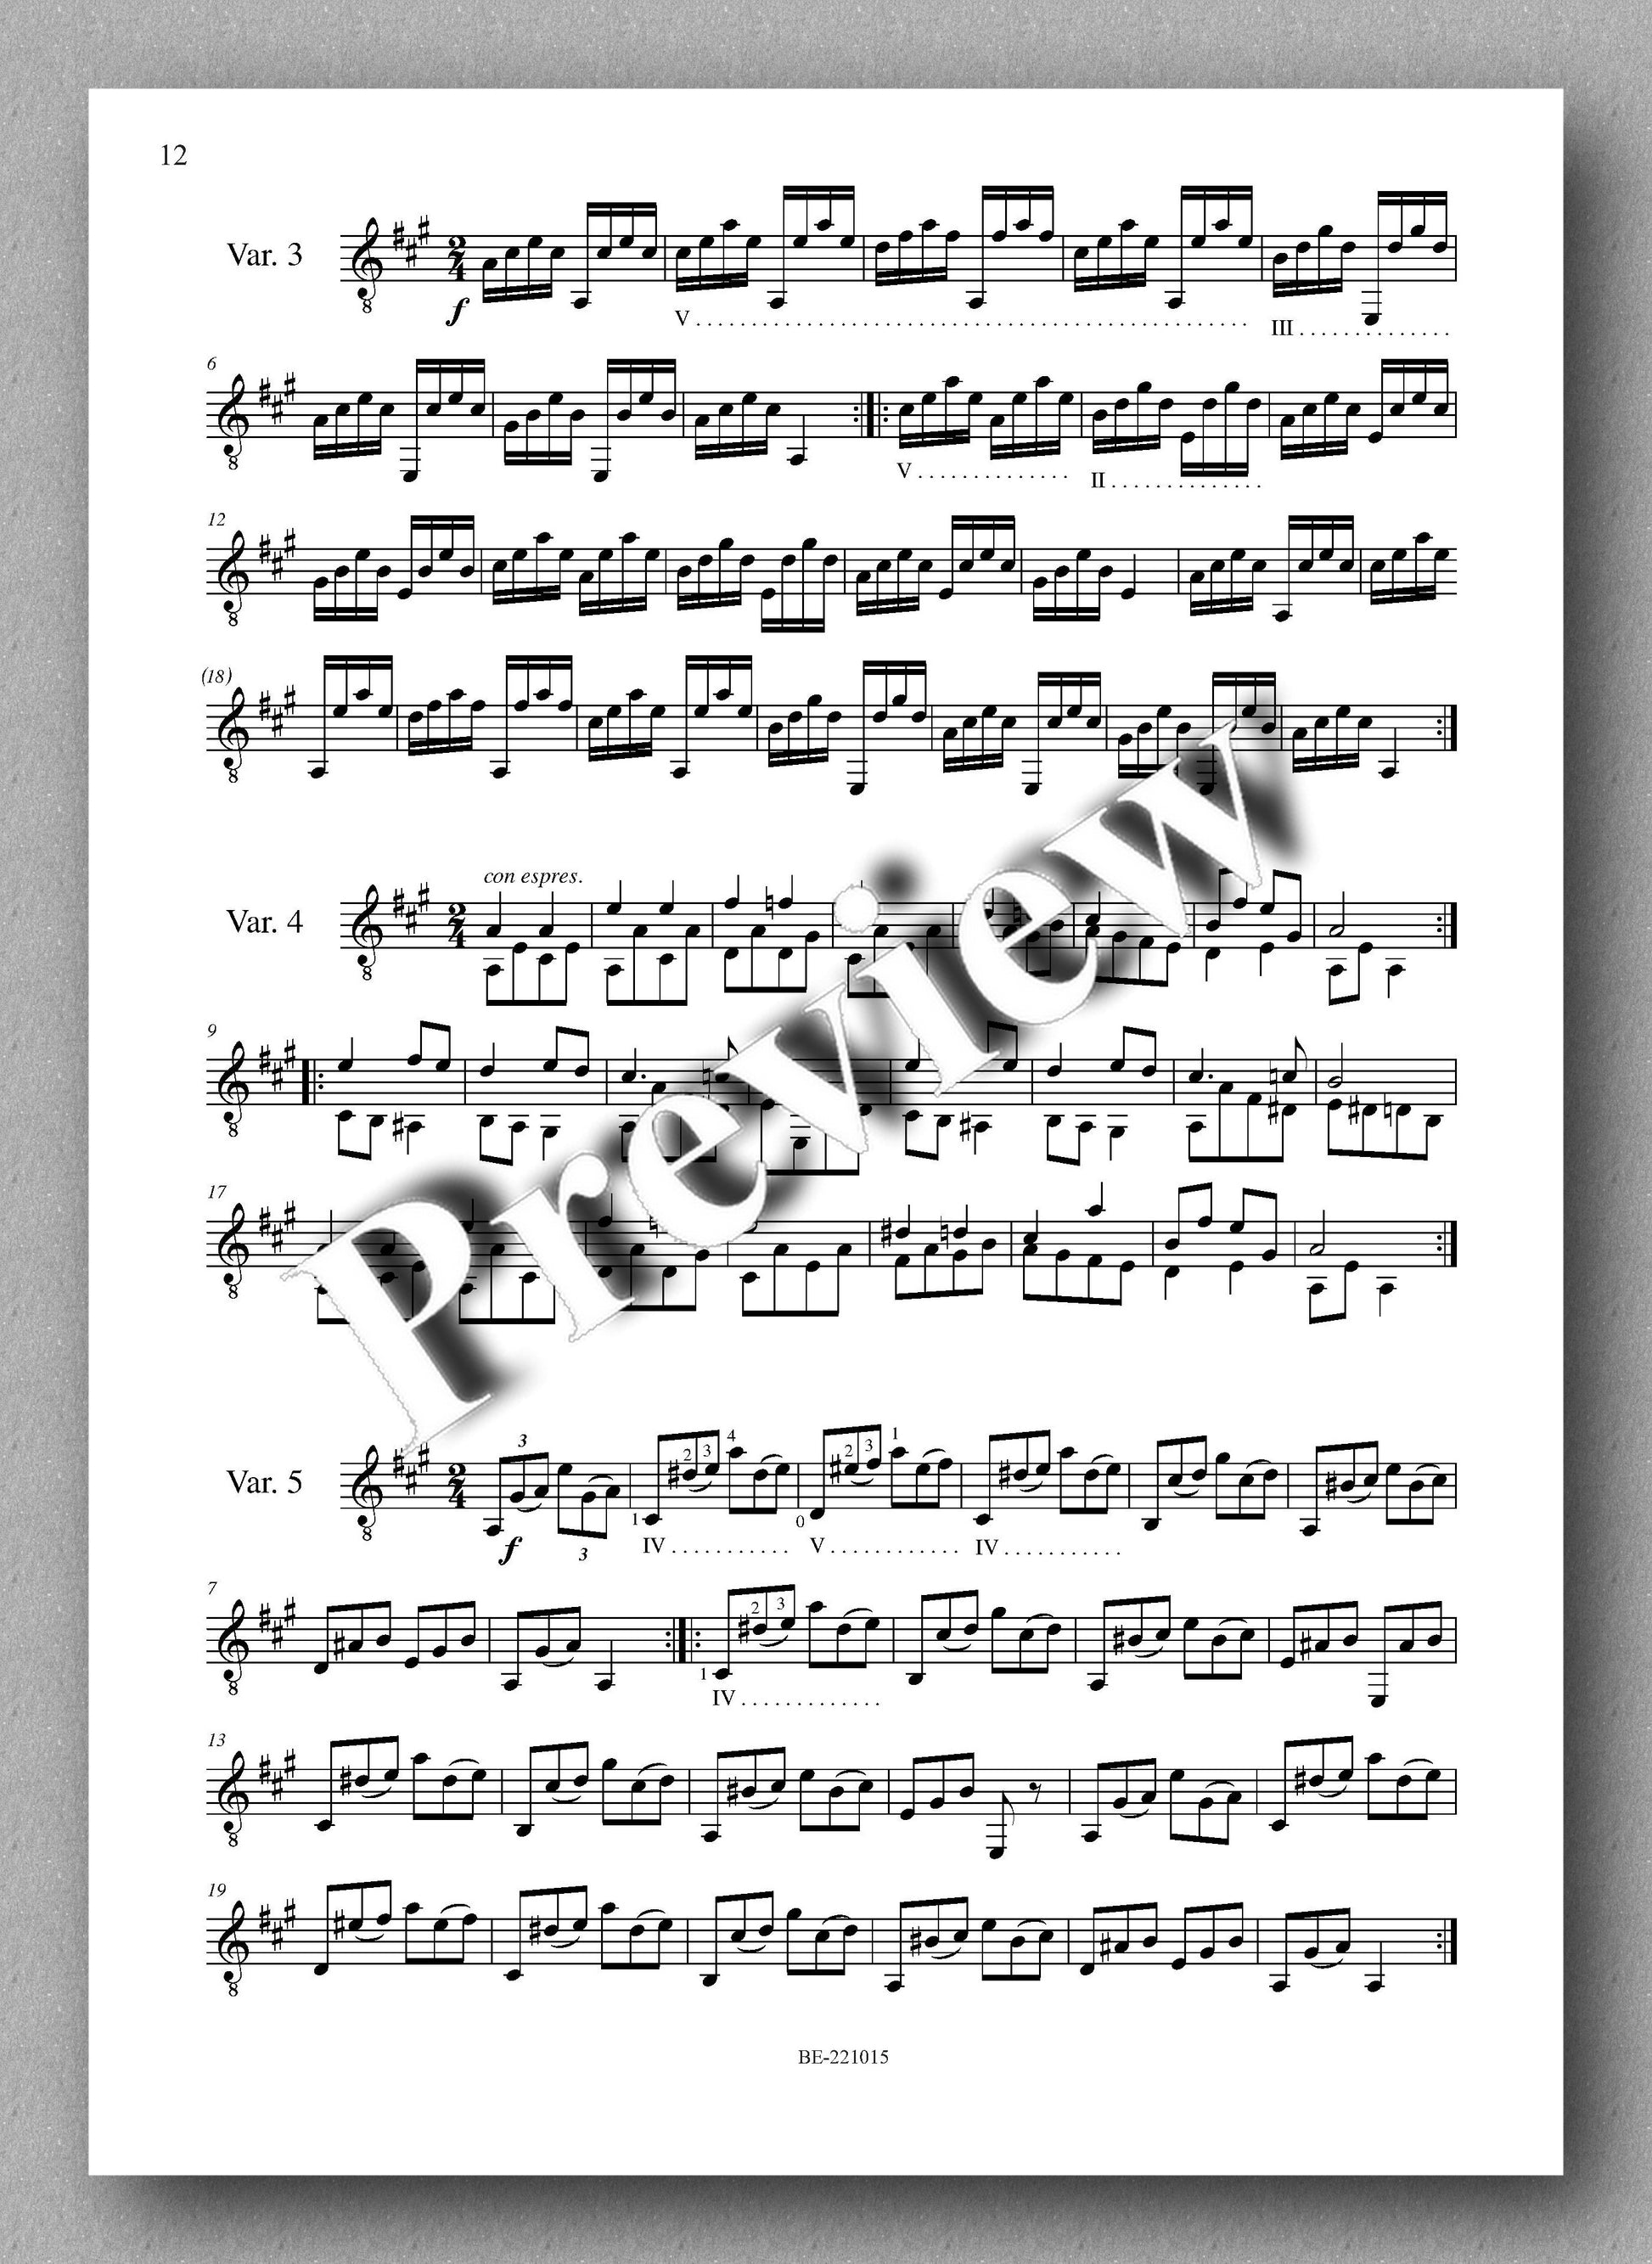 Molino, Collected Works for Guitar Solo, Vol. 10 - preview of the music score 3